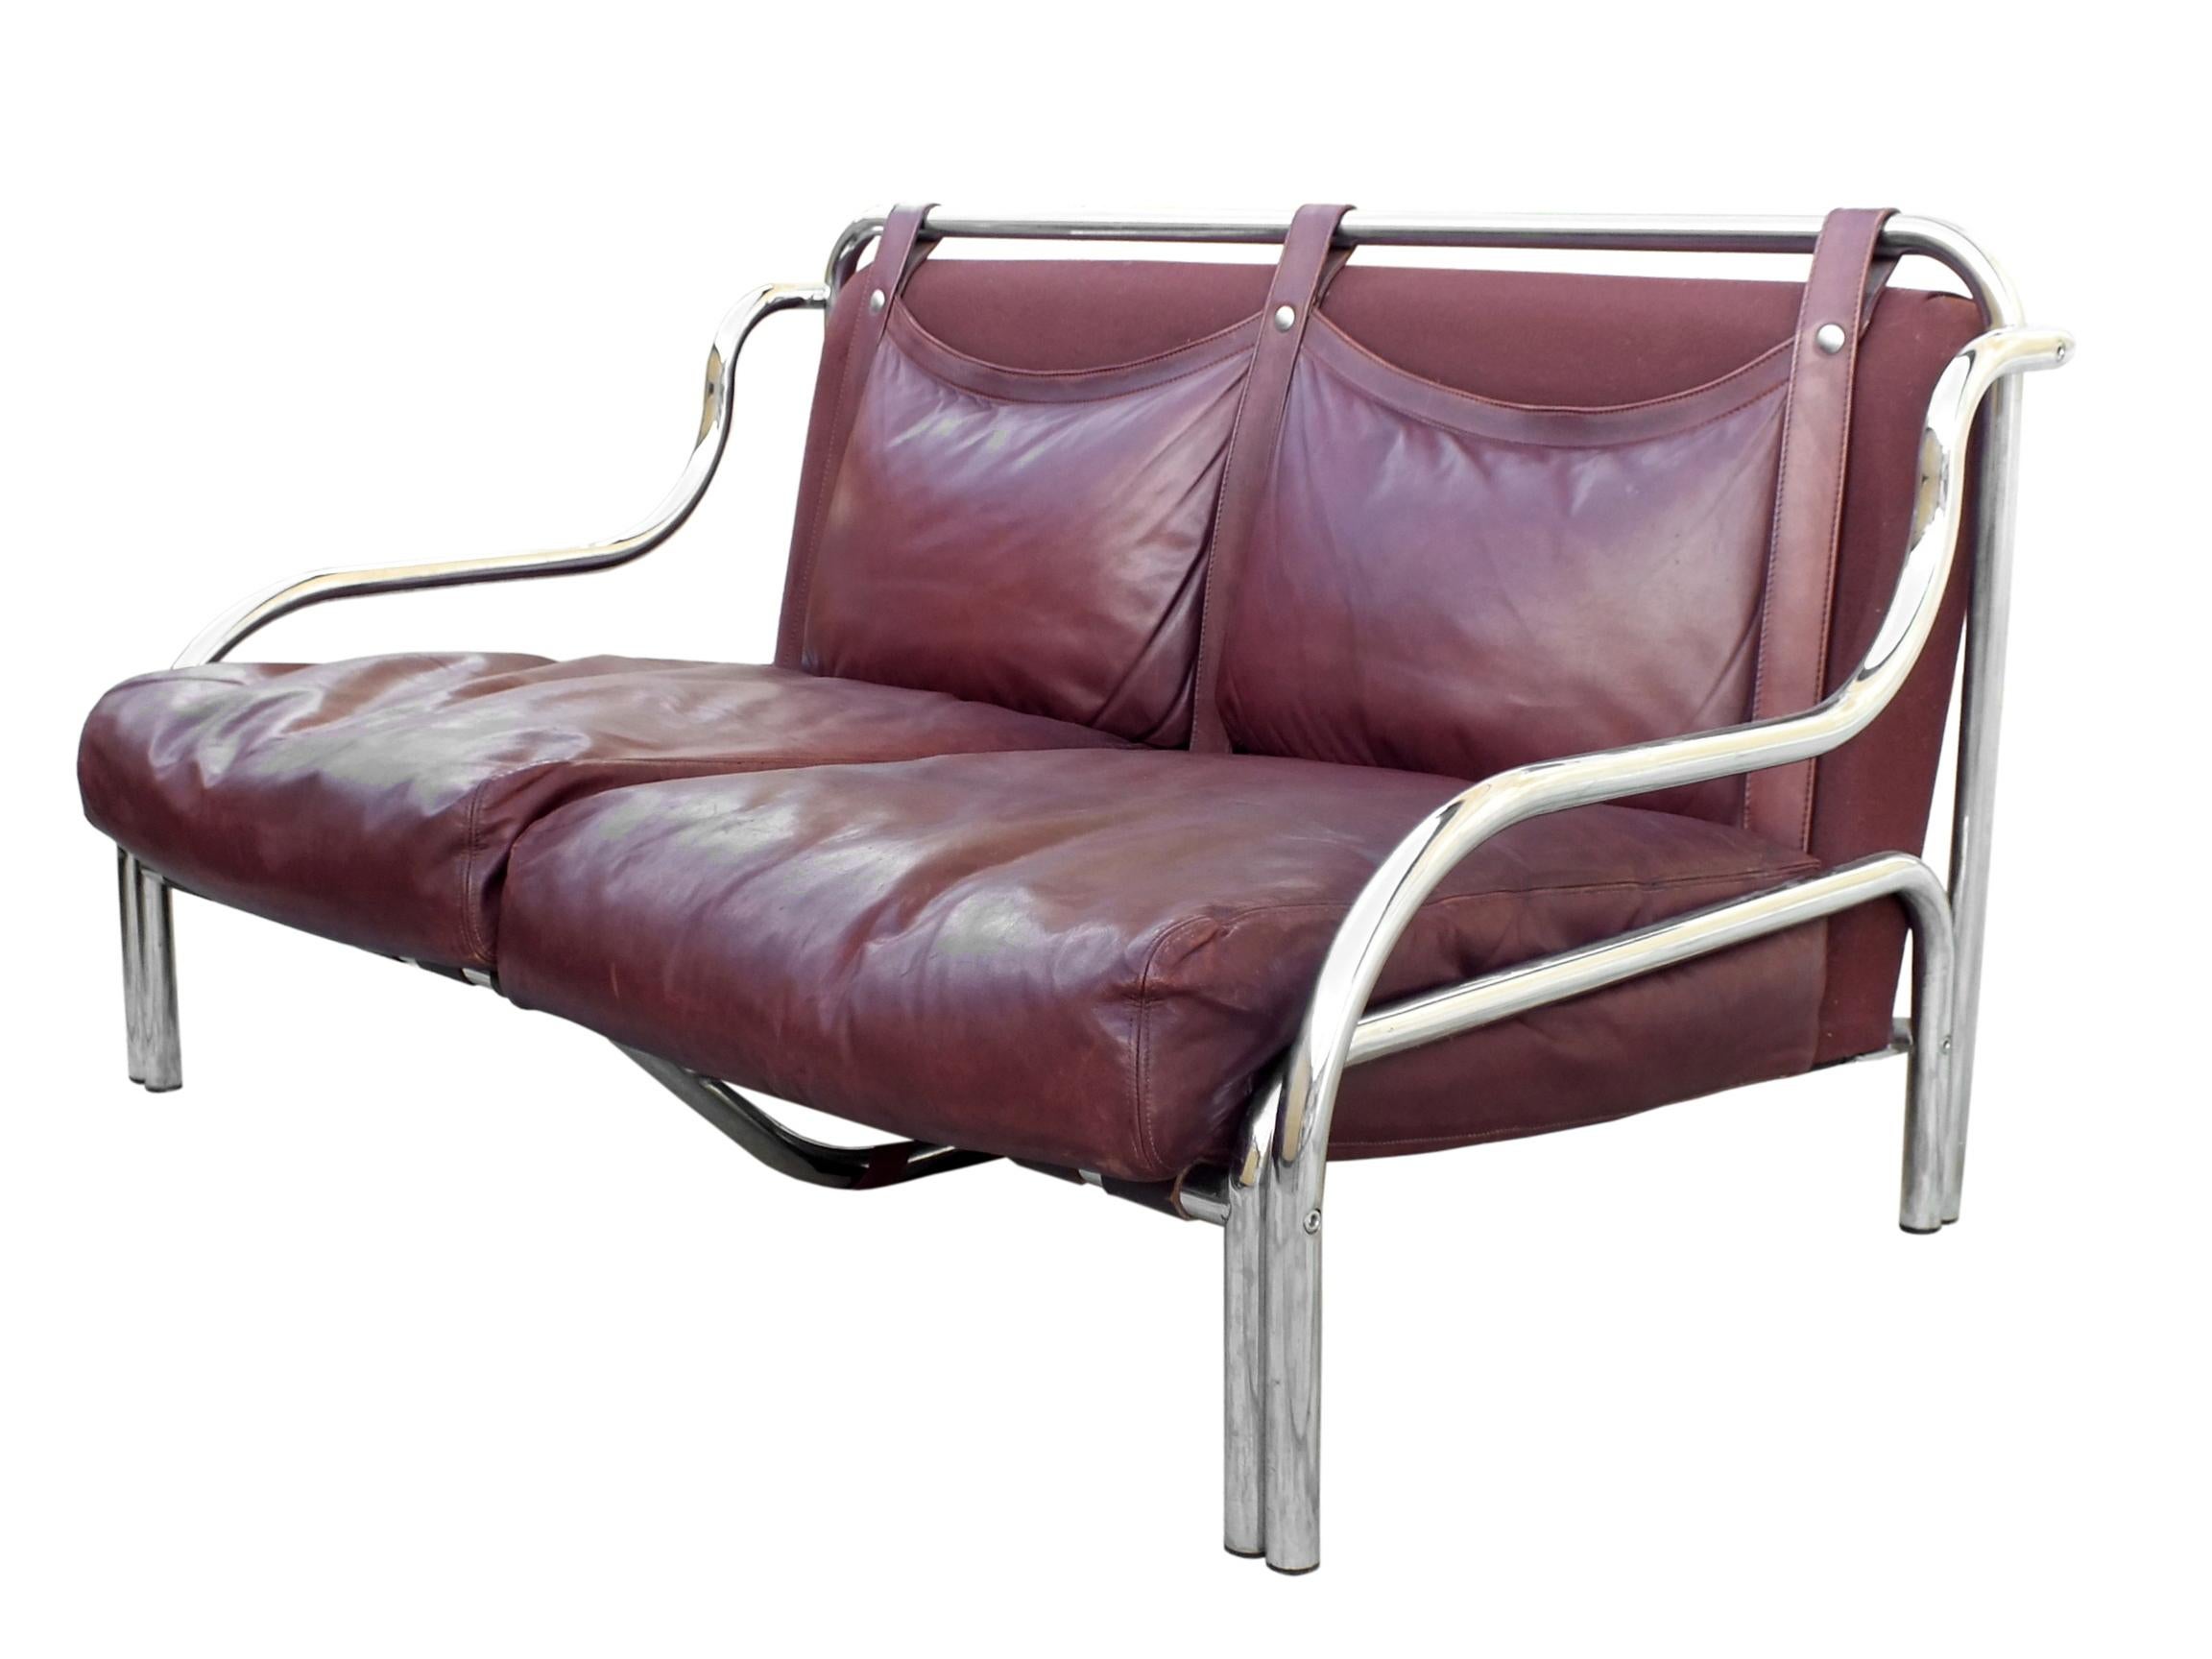 Modern Pair of Vintage Sofas by Gae Aulenti Production Poltronova, Italy, 1965 For Sale